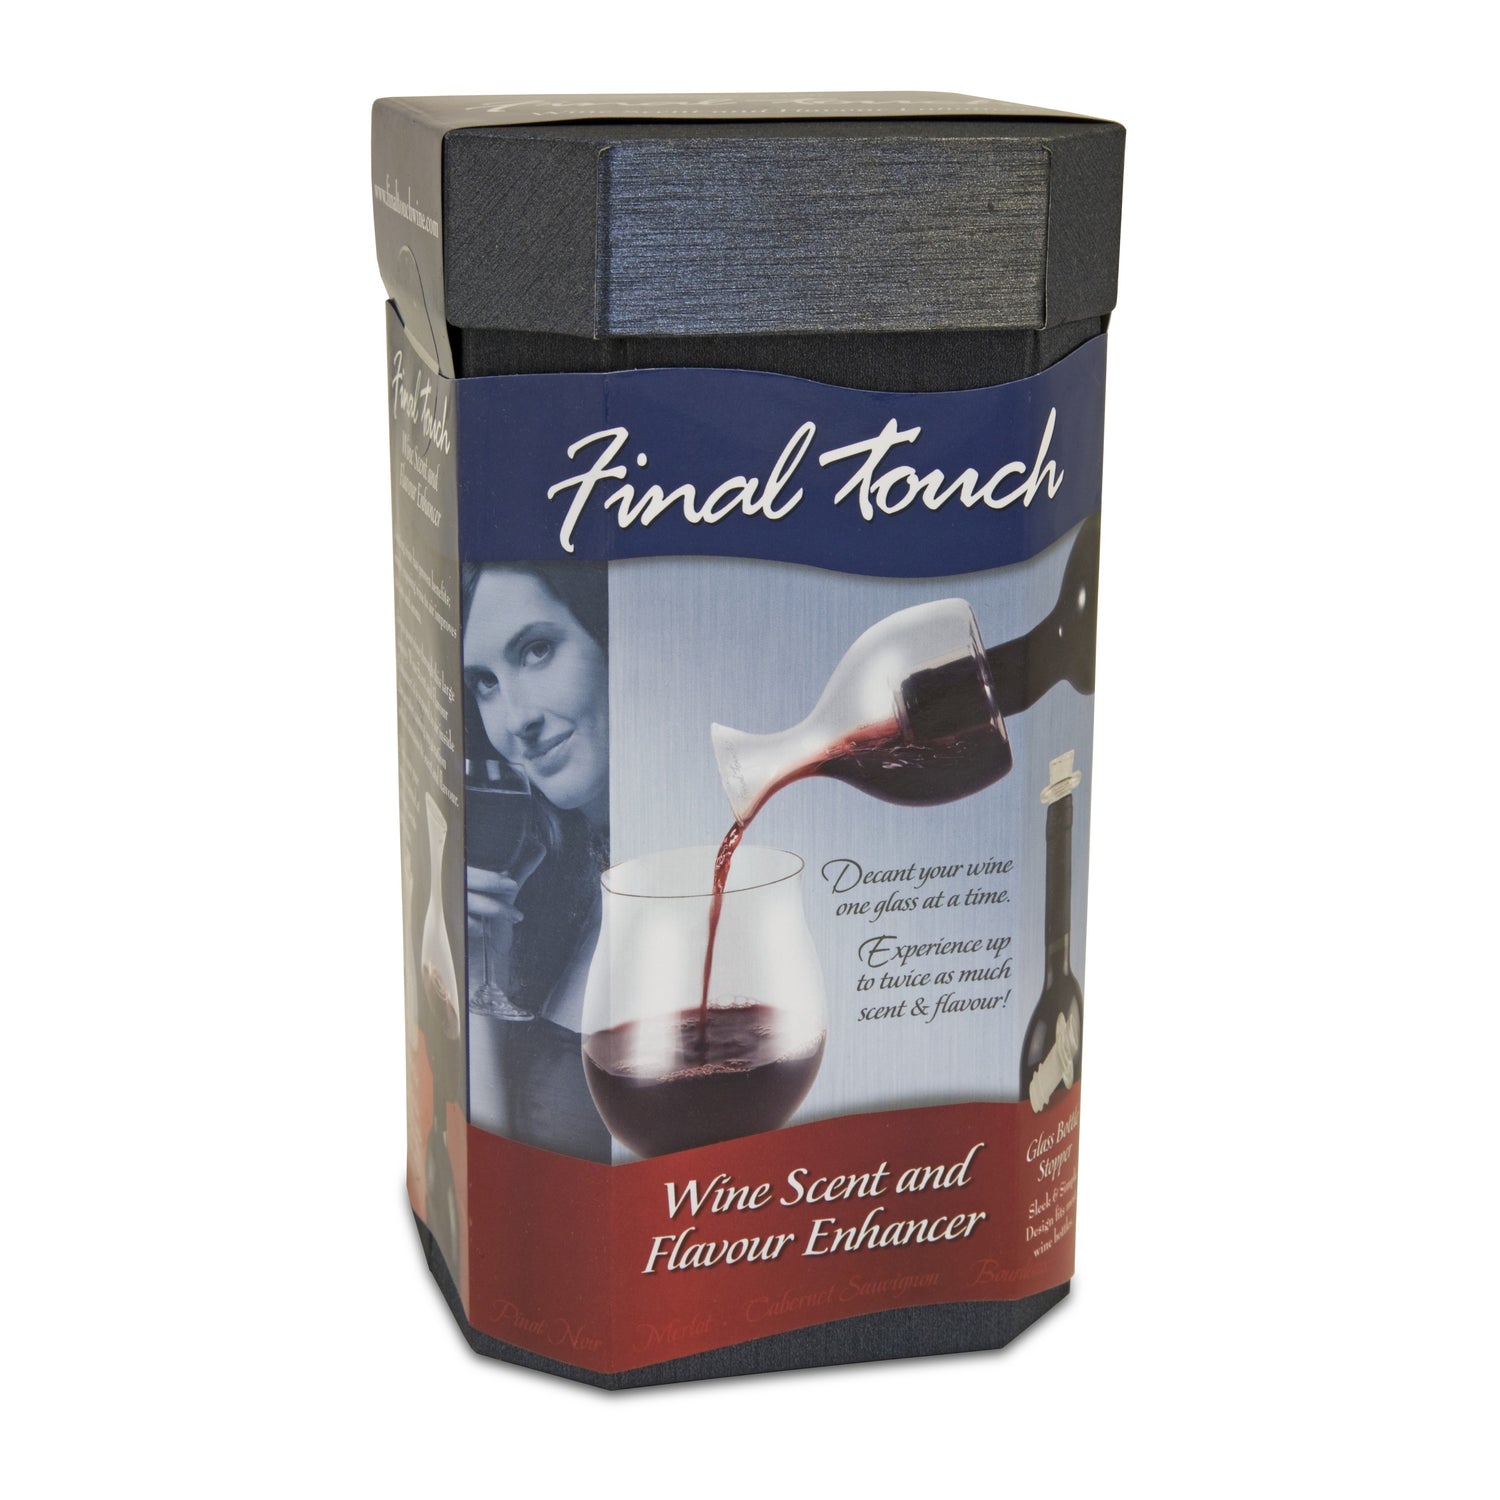 Wine Scent and Flavour Enhancer